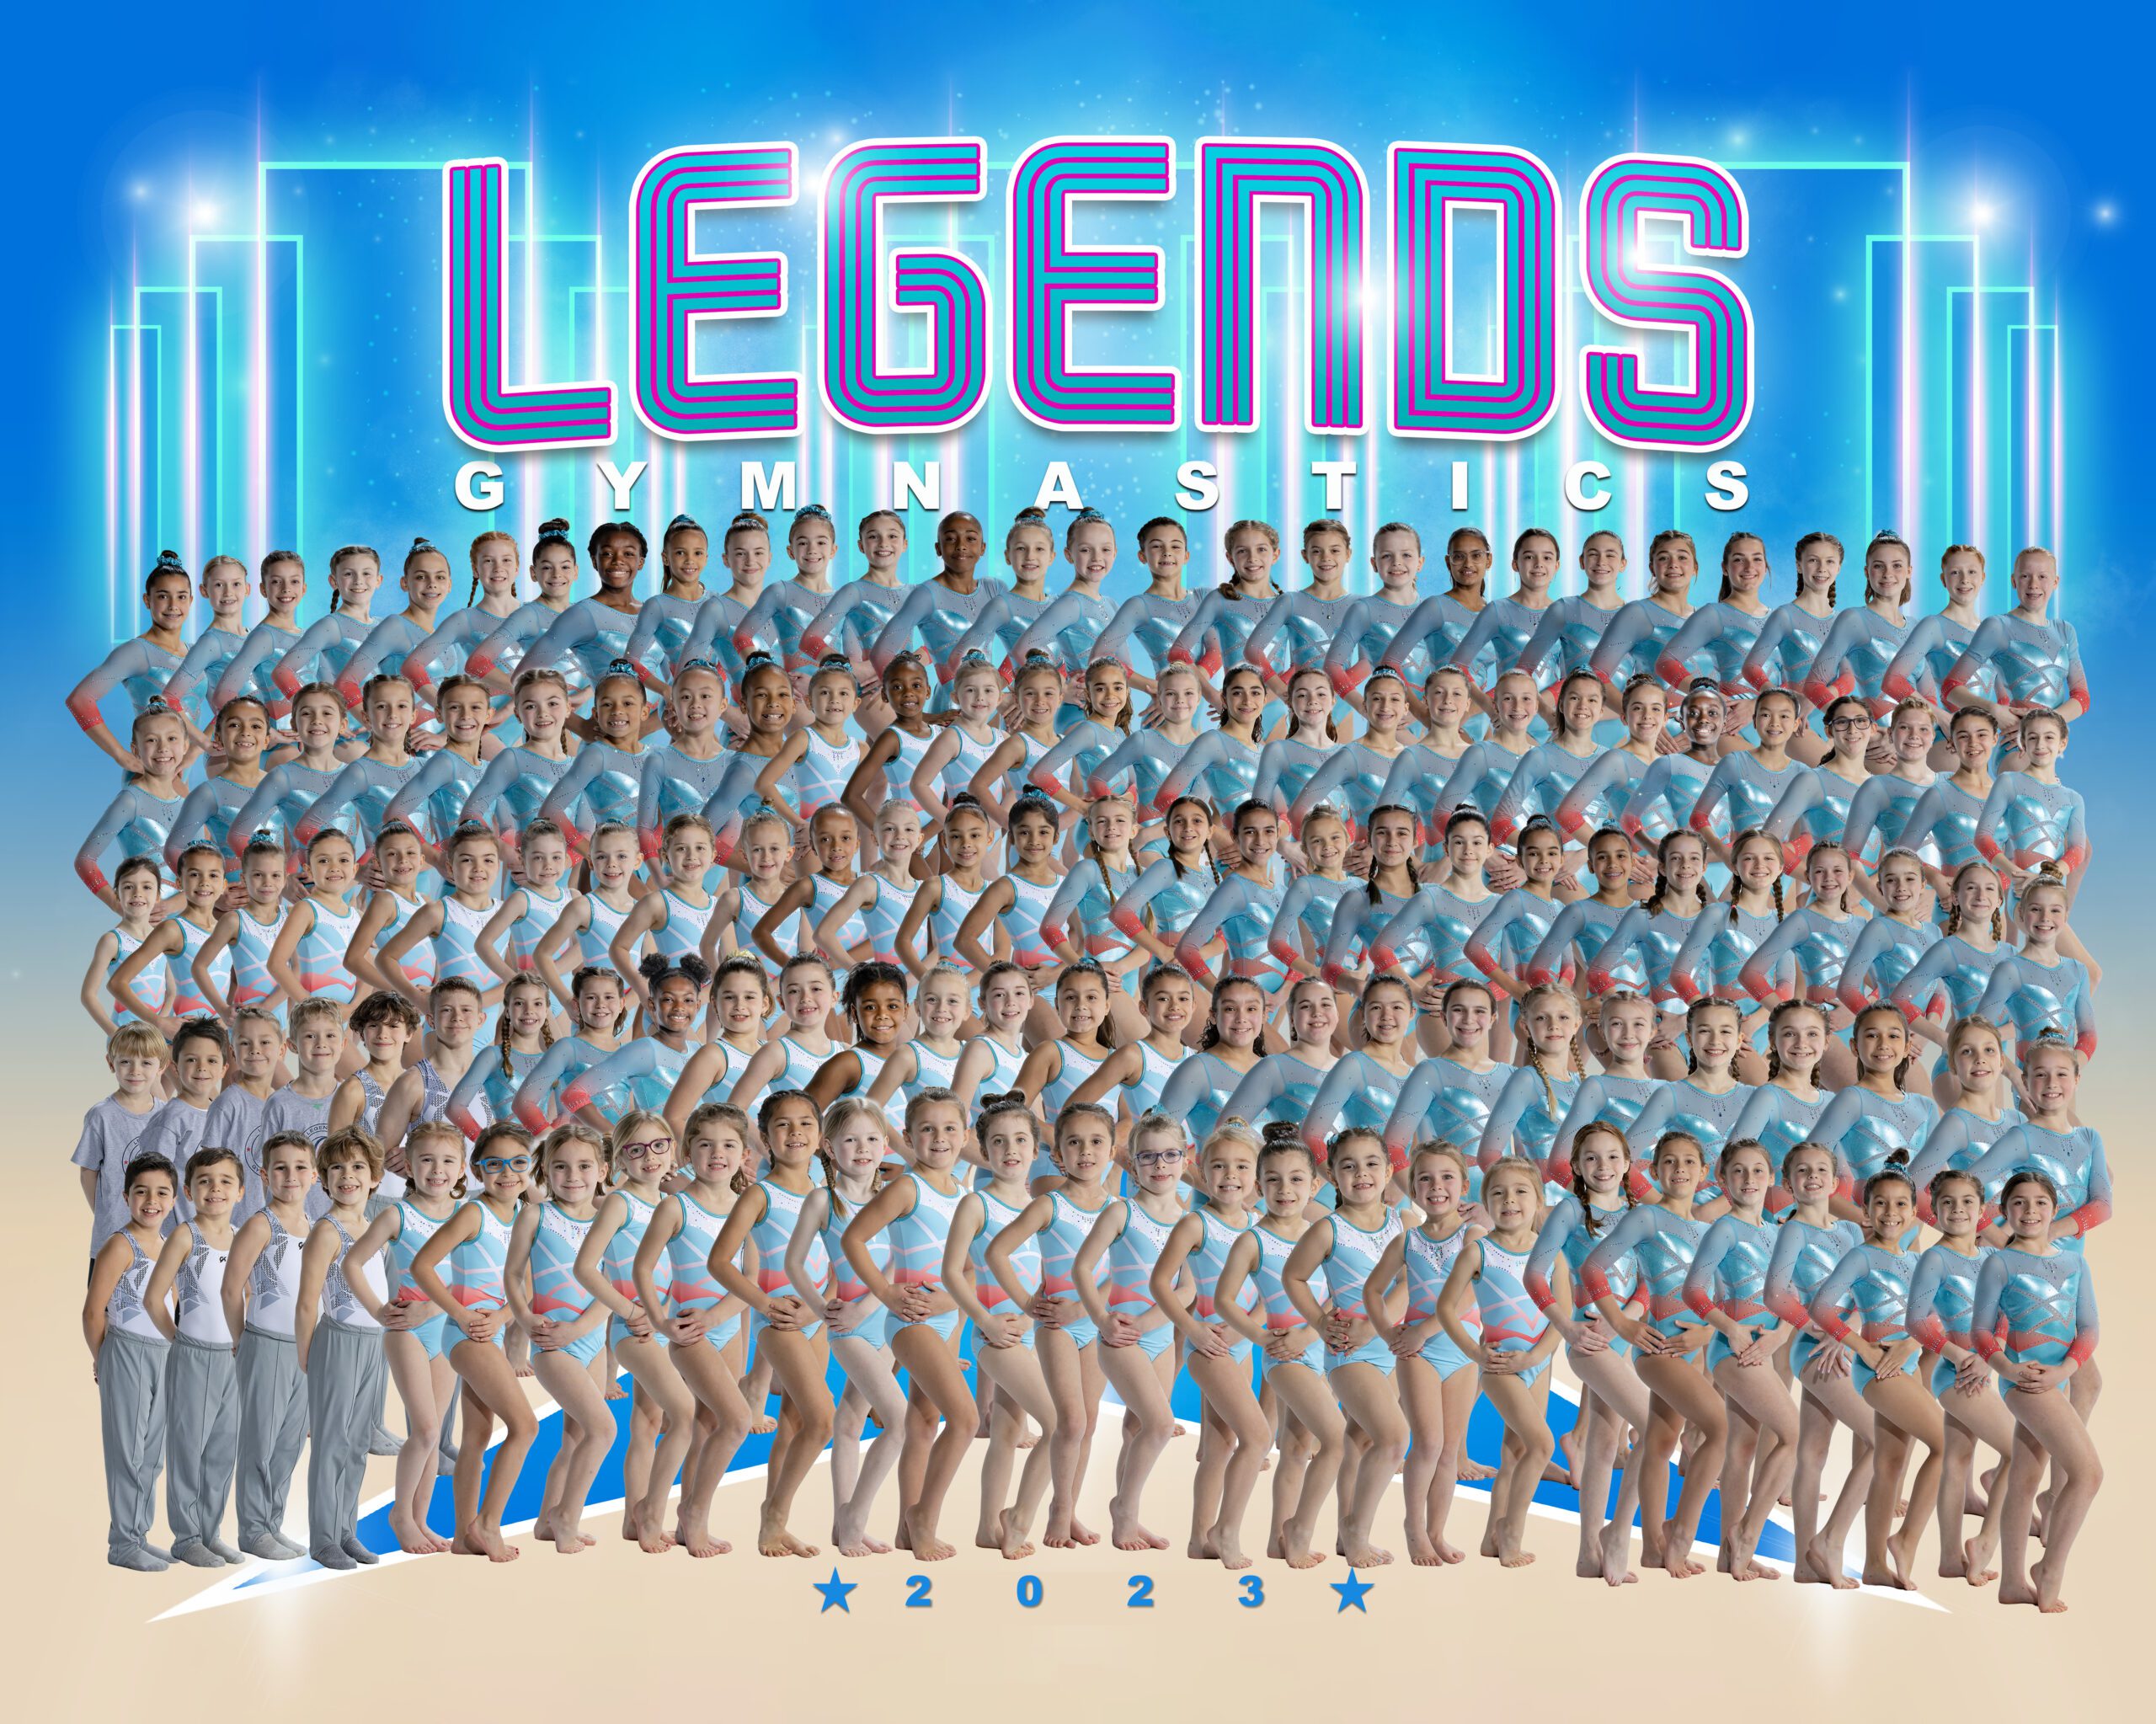 Competitive Team photo at Legends Gymnastics in North Andover, MA.